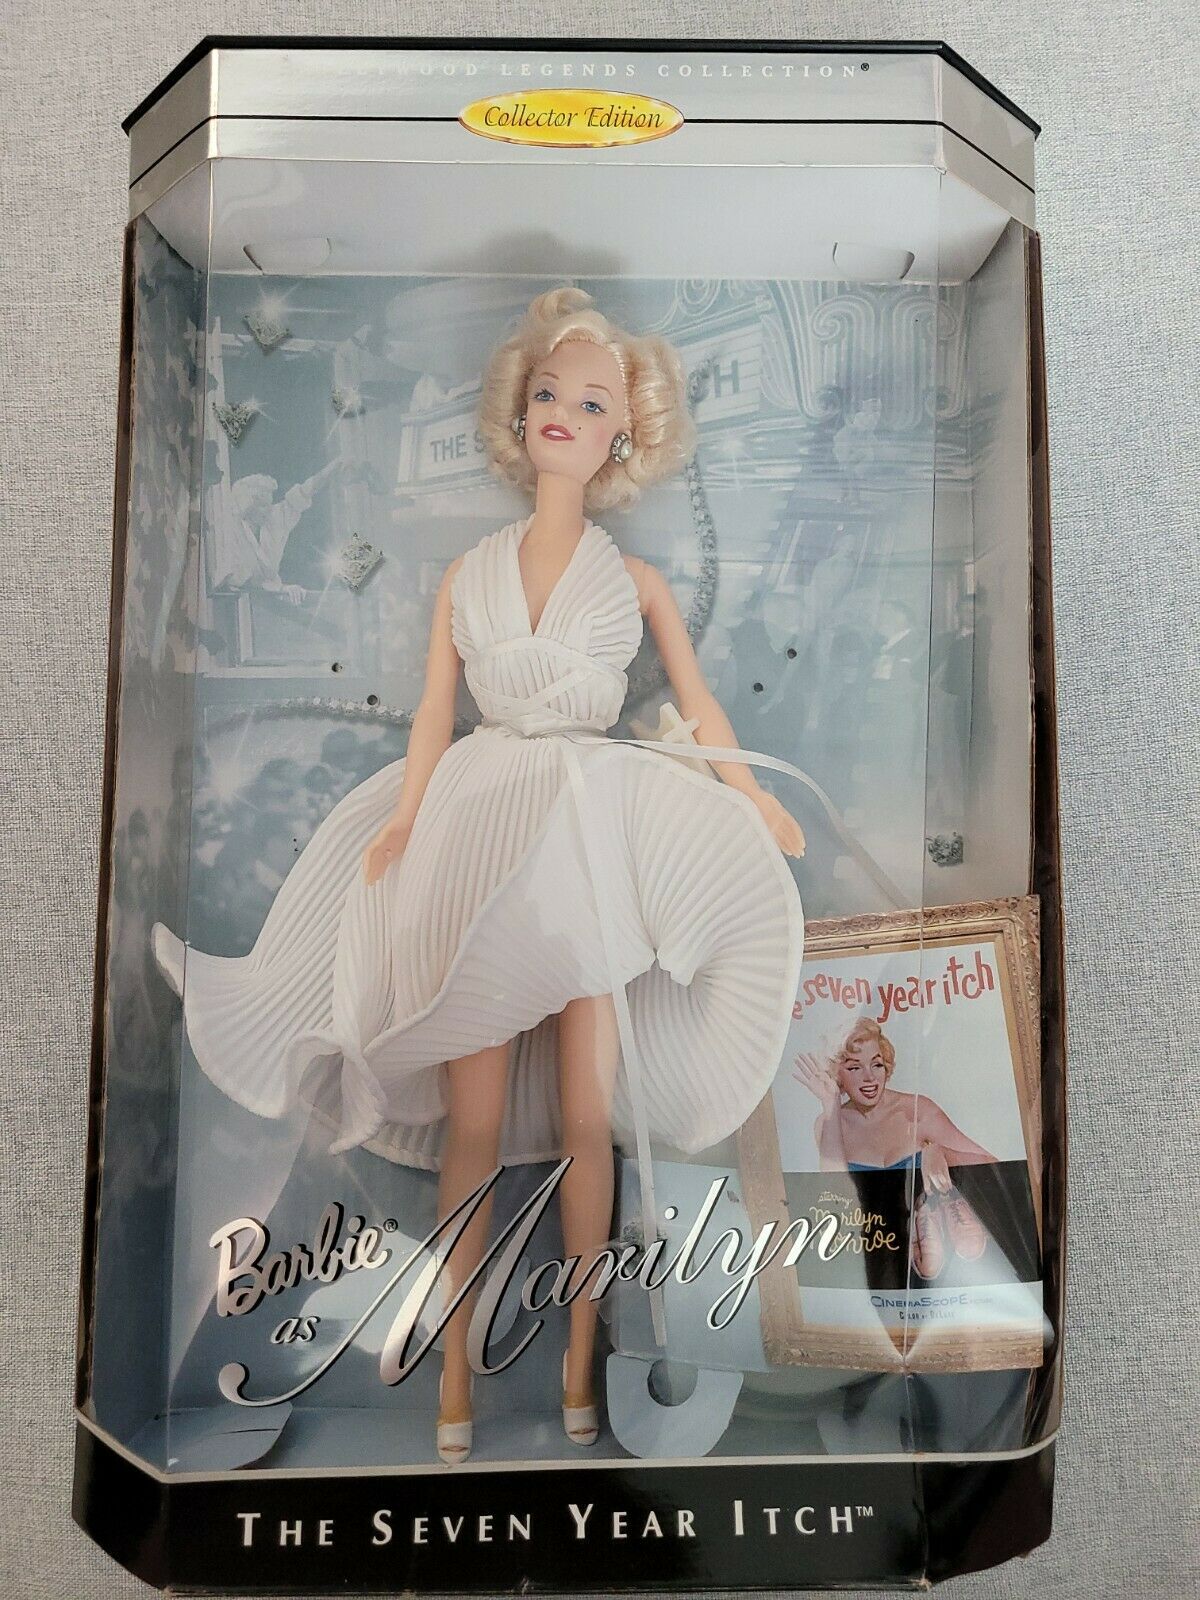 Barbie As Marilyn Monroe The Seven Year Itch.